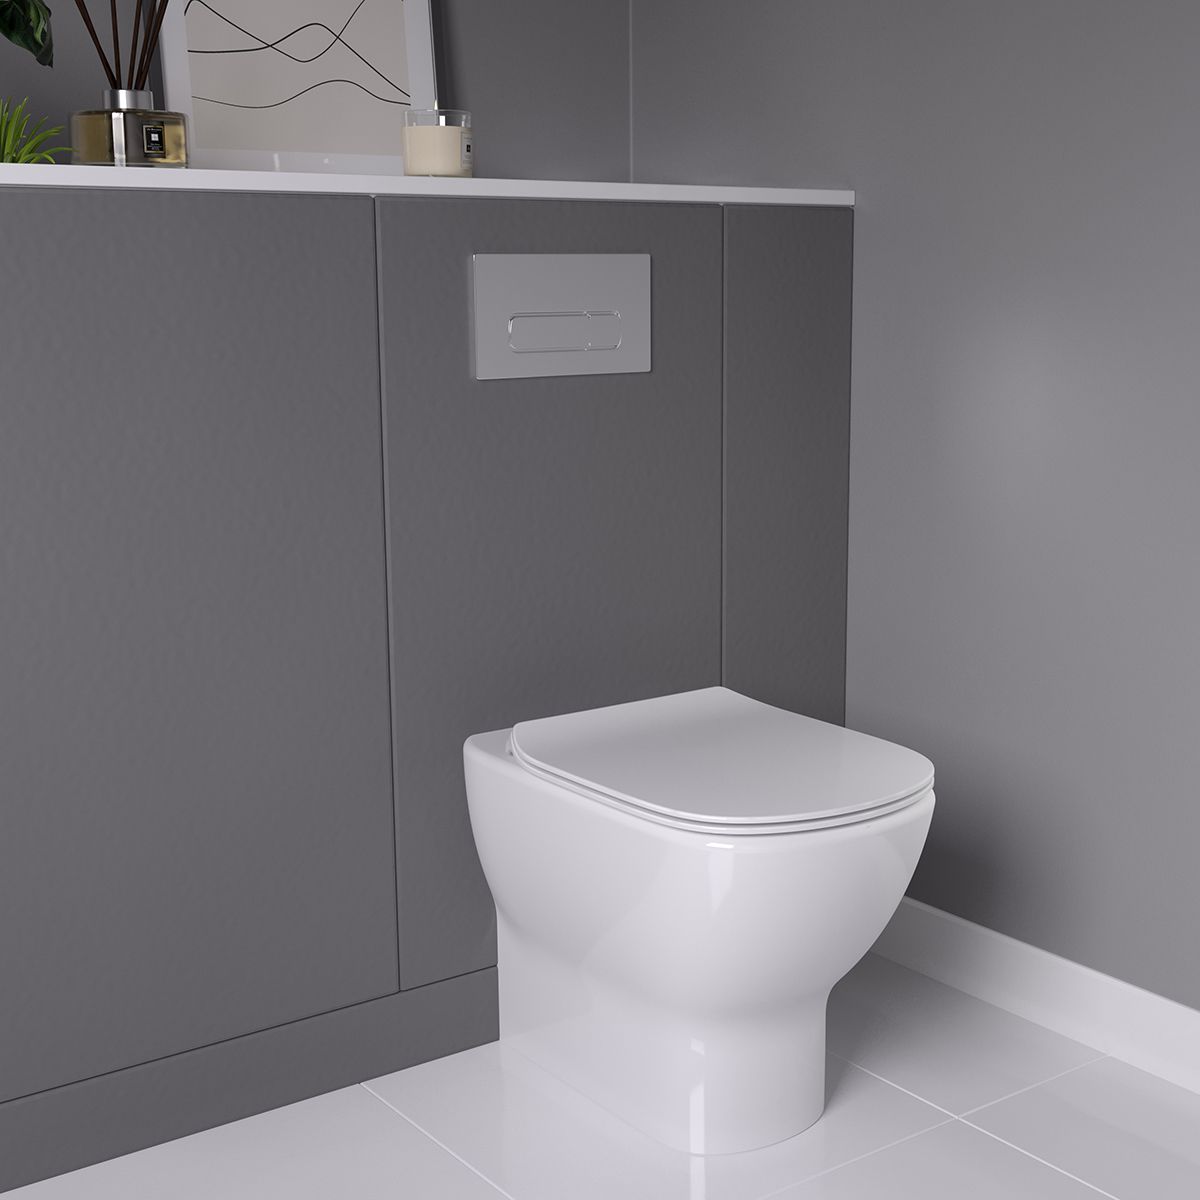 Ideal Standard Tesi White Back to wall Toilet with Soft close seat